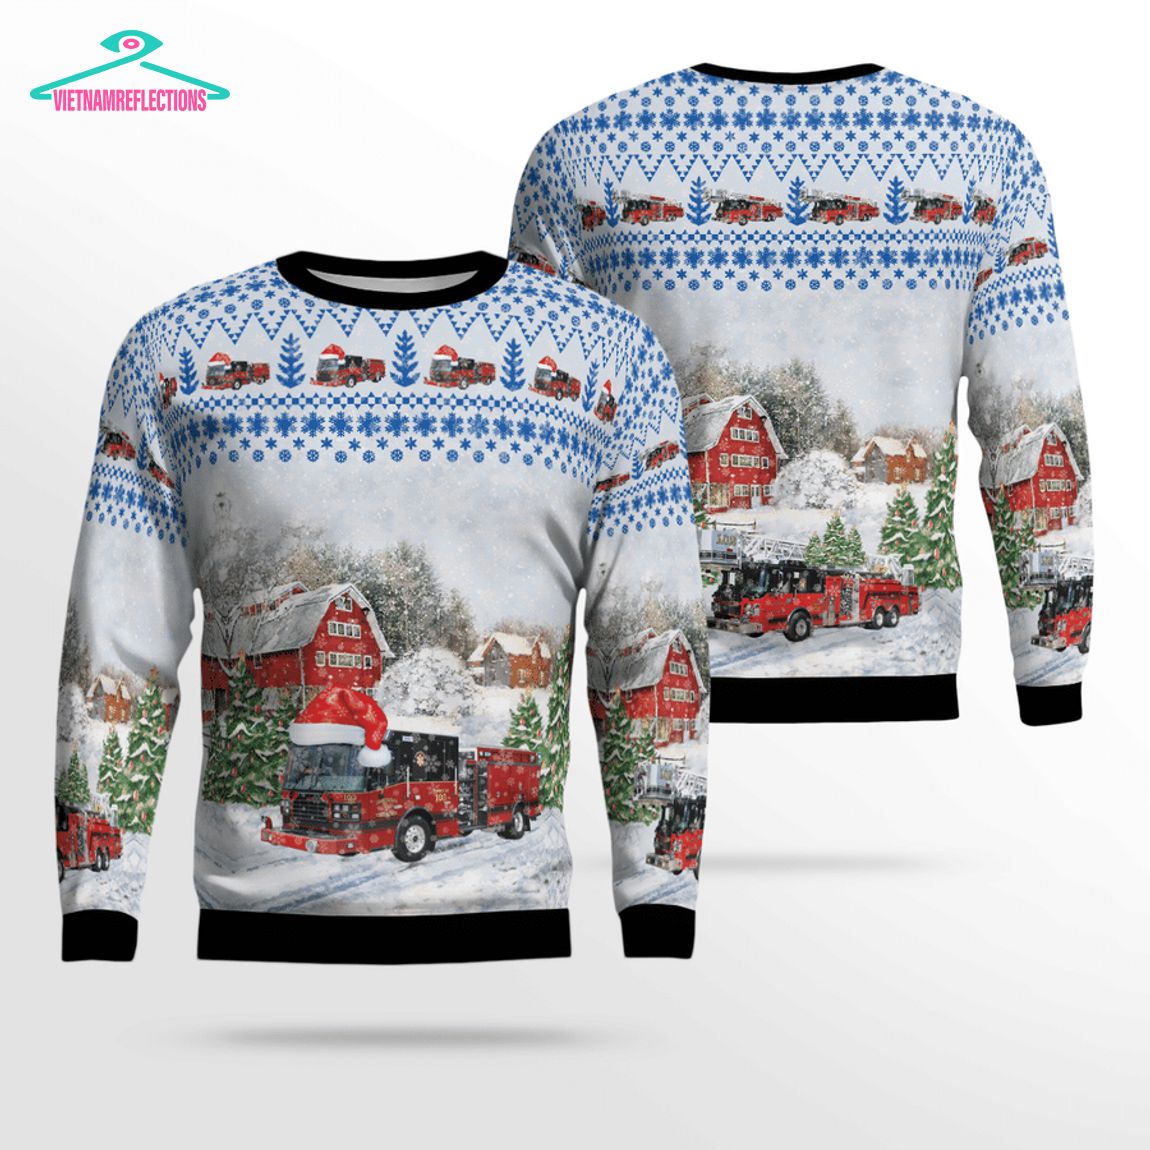 Illinois Downers Grove Fire Department 3D Christmas Sweater